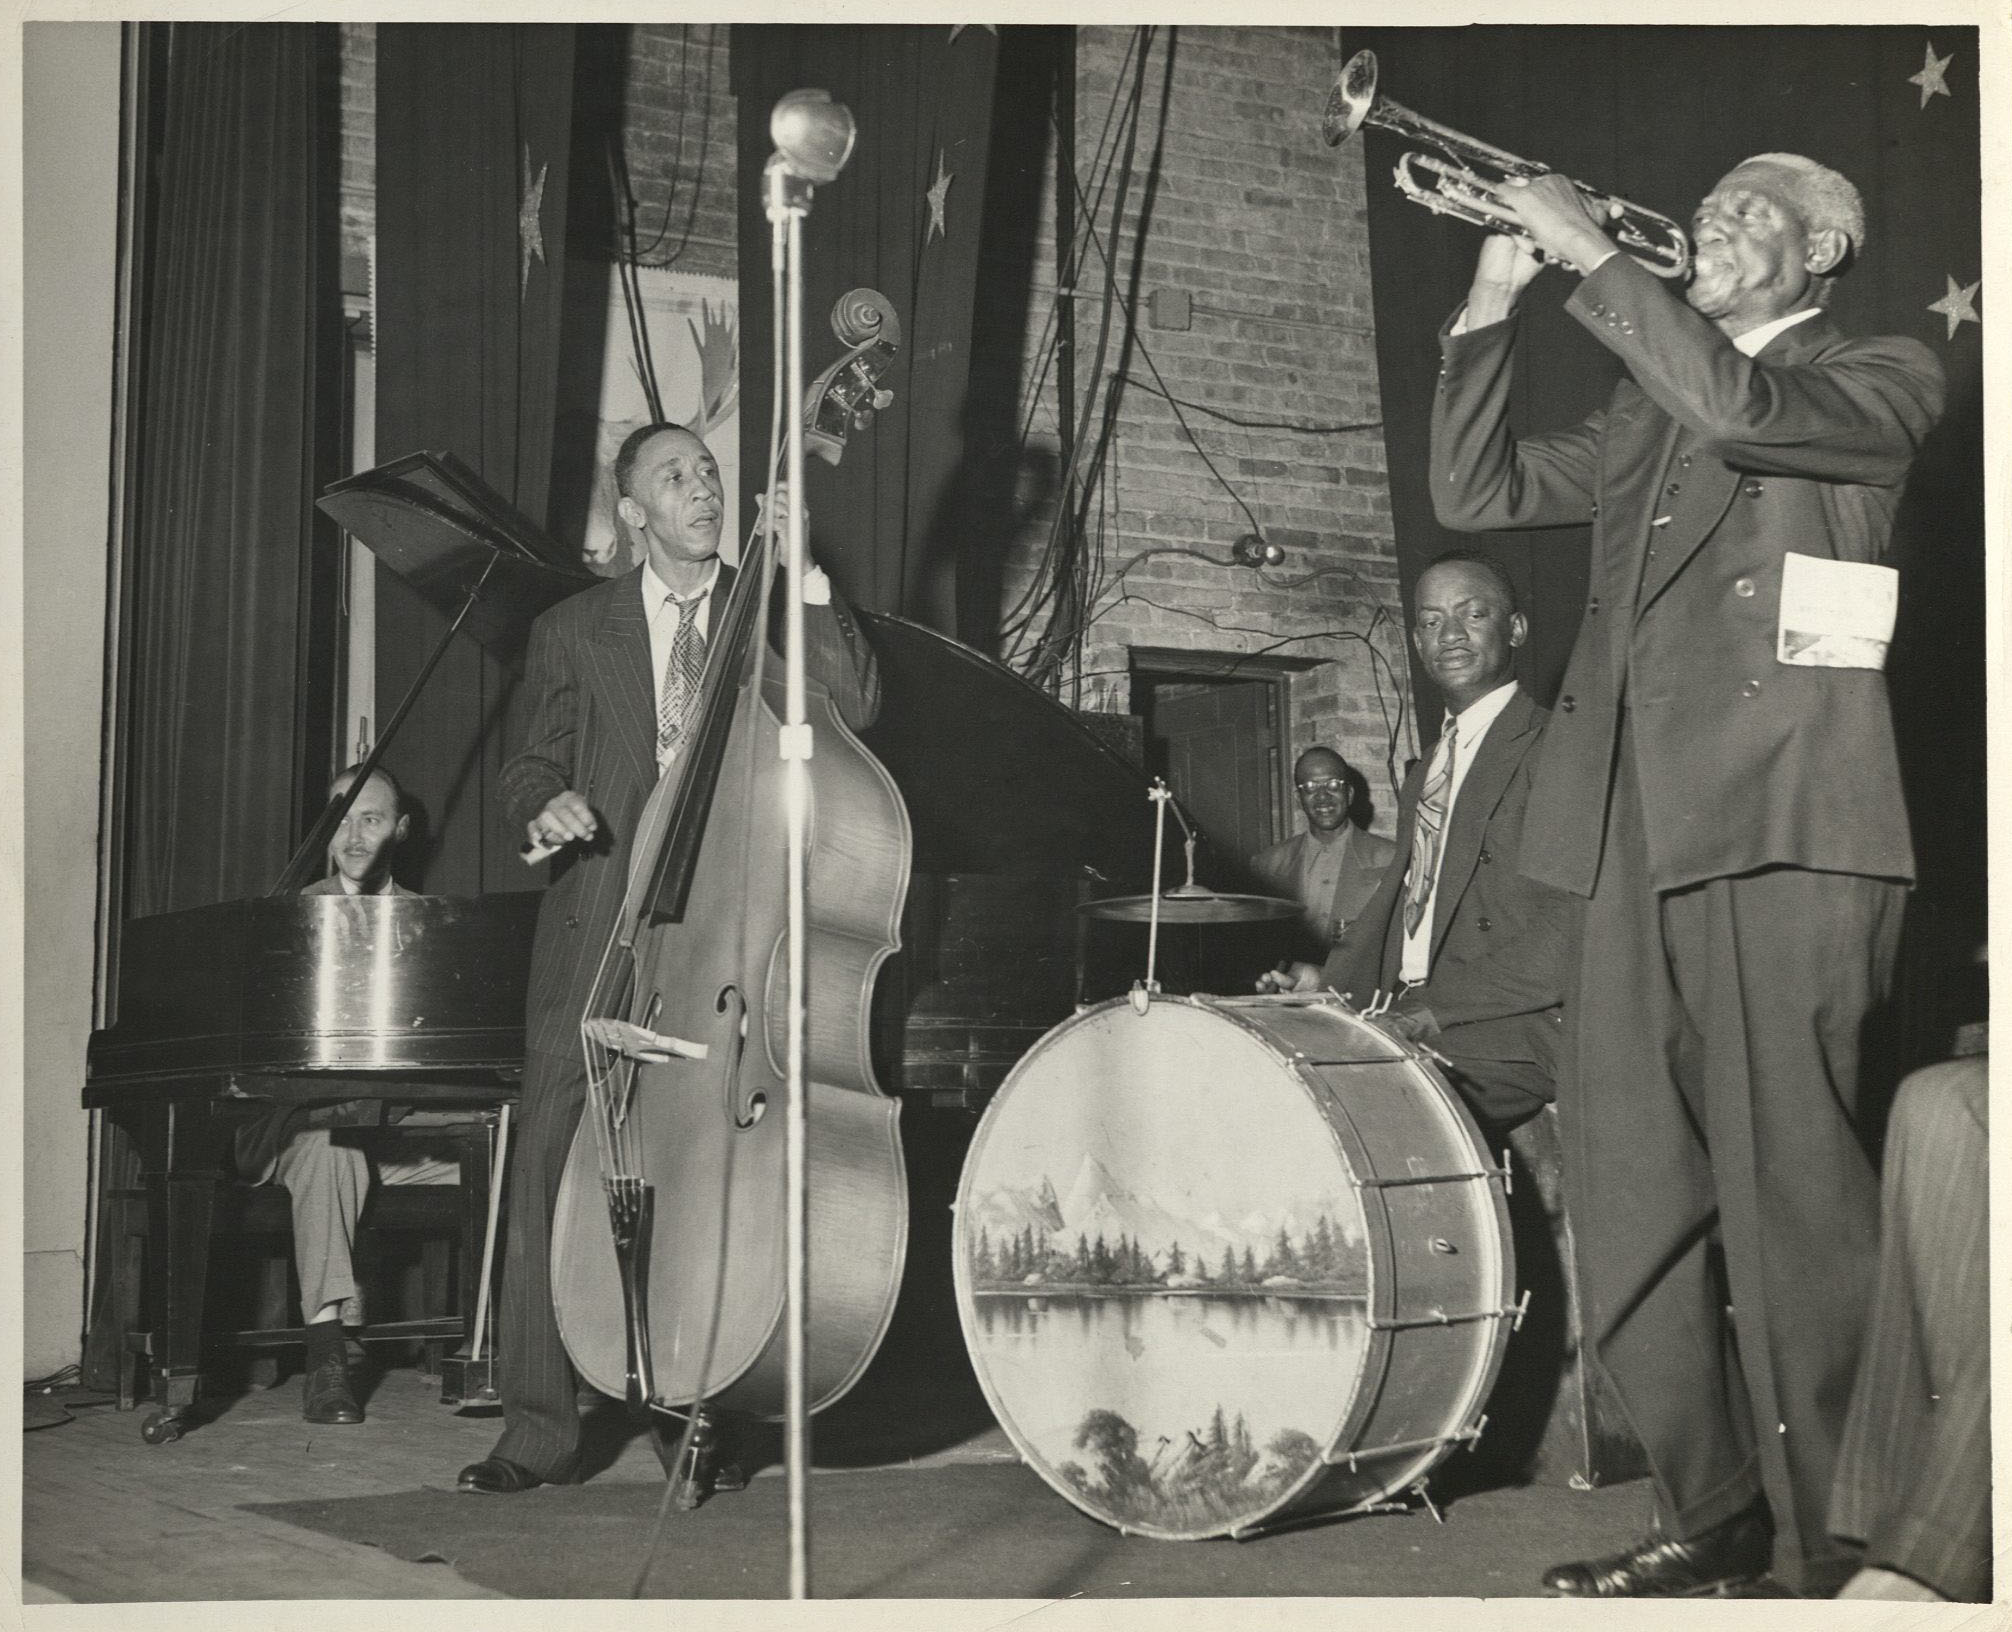 Don Ewell, seated at piano, plays with trumpeter Bunk Johnson and his band, unidentified date and location, photographer: Ward Silver; Don Ewell collection, HJA-005, Tulane University Special Collections, New Orleans, LA.